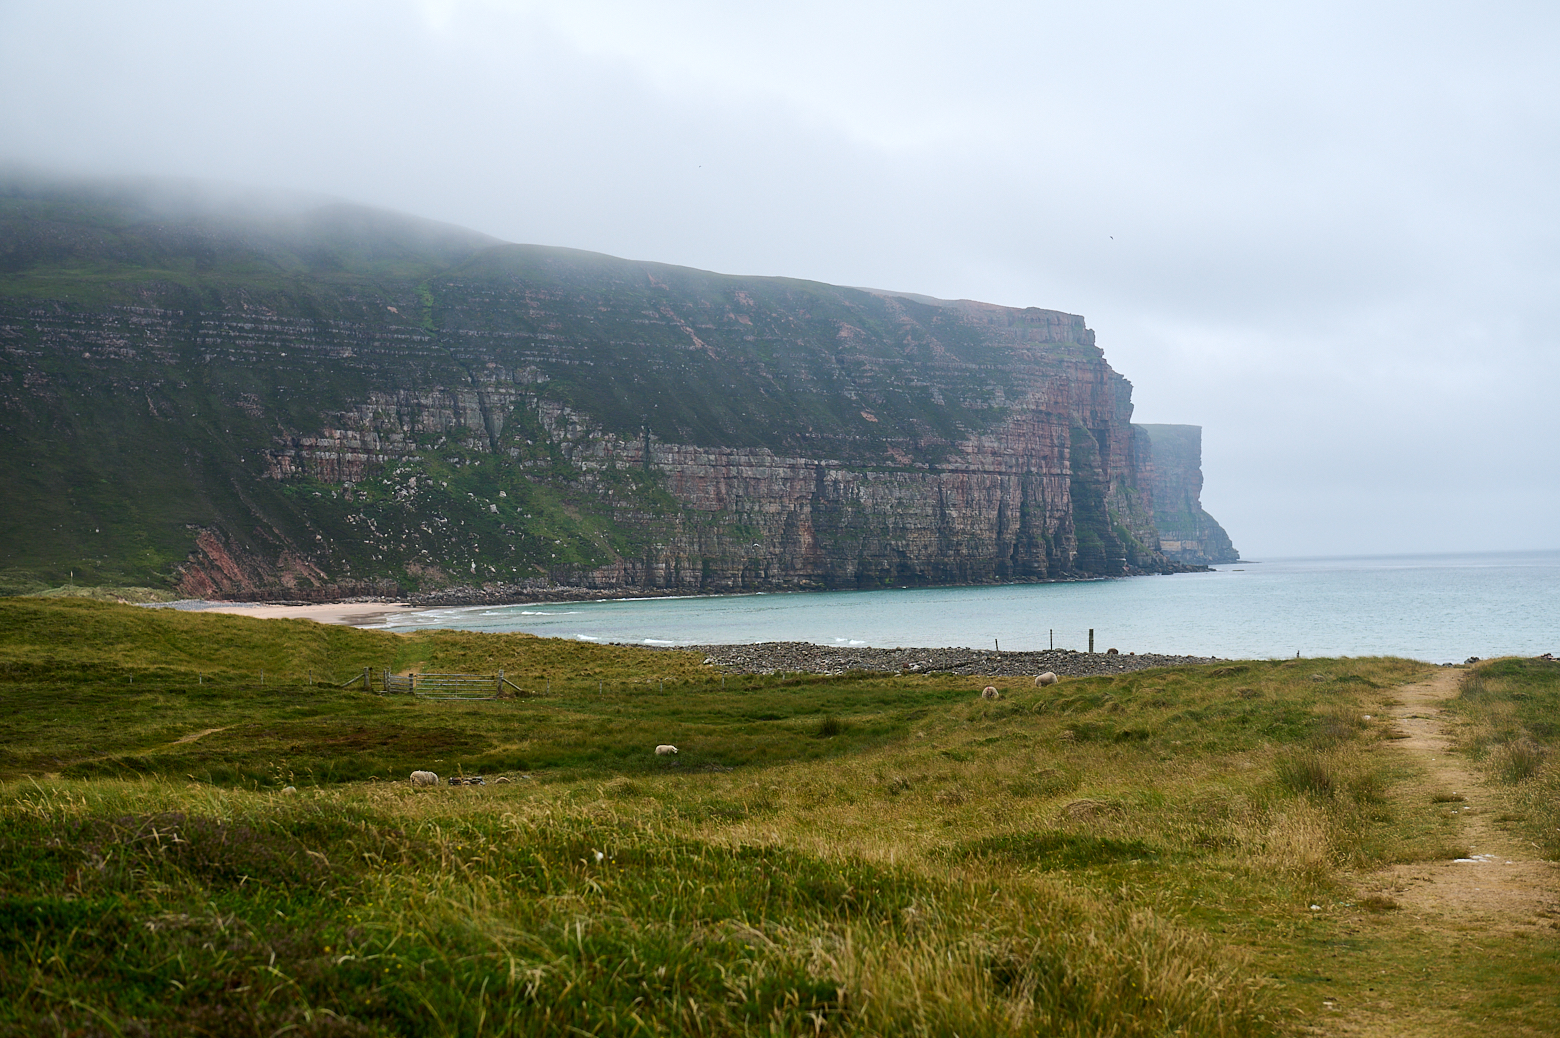 A day trip to Hoy, the island under the cloud, visiting Betty Corrigans Grave and Rackwick beach.